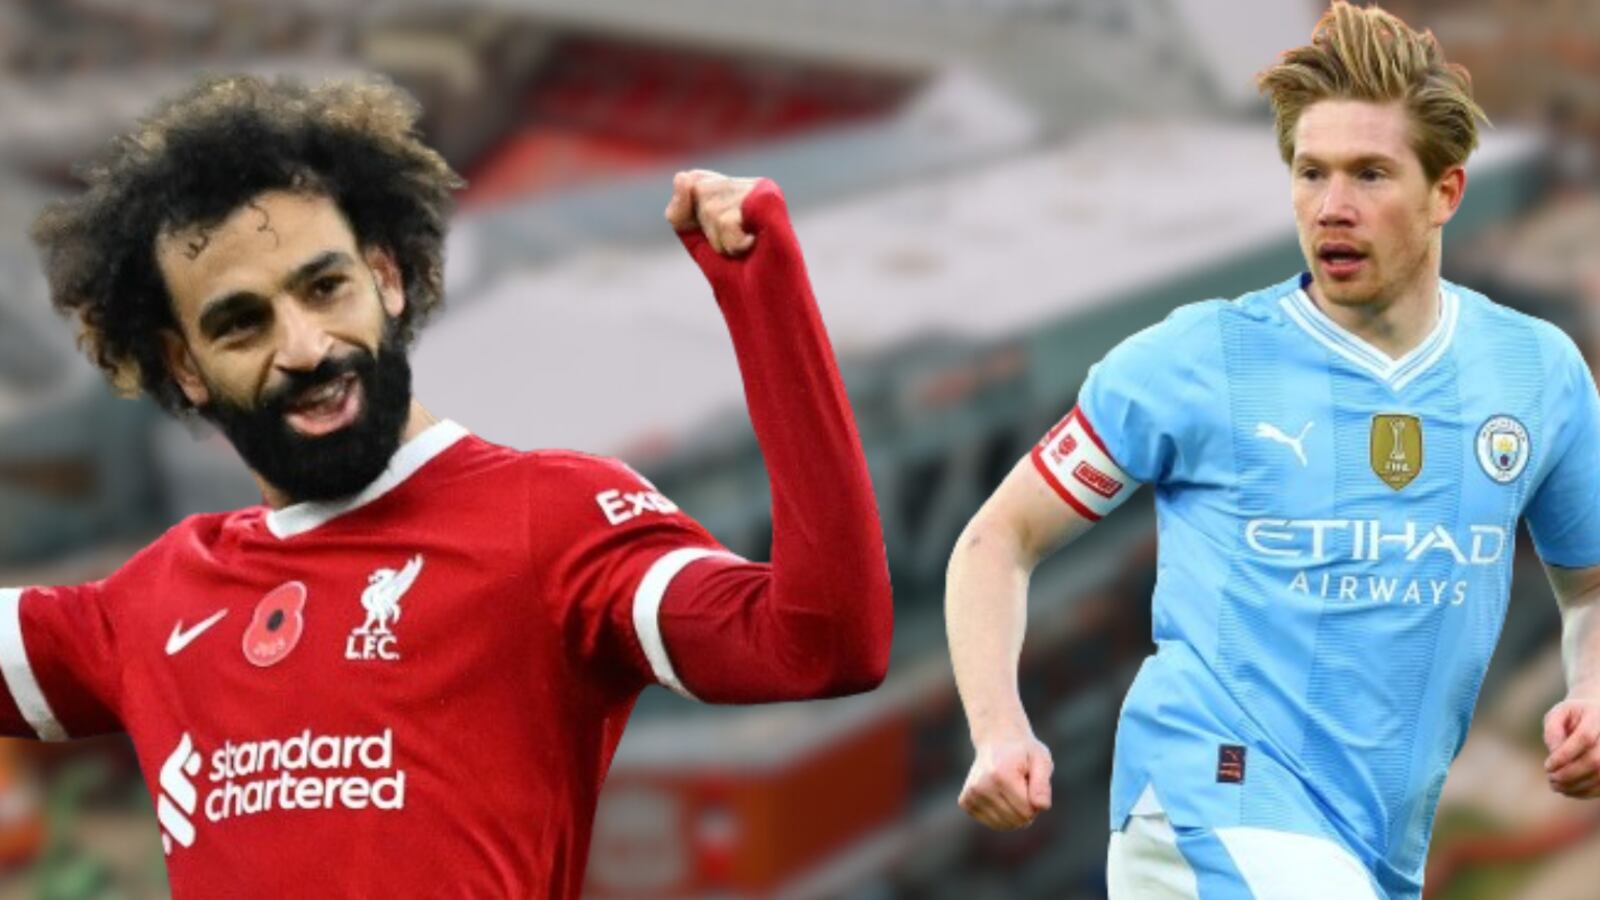 Salah and De Bruyne receive millionaire offers that could send them away